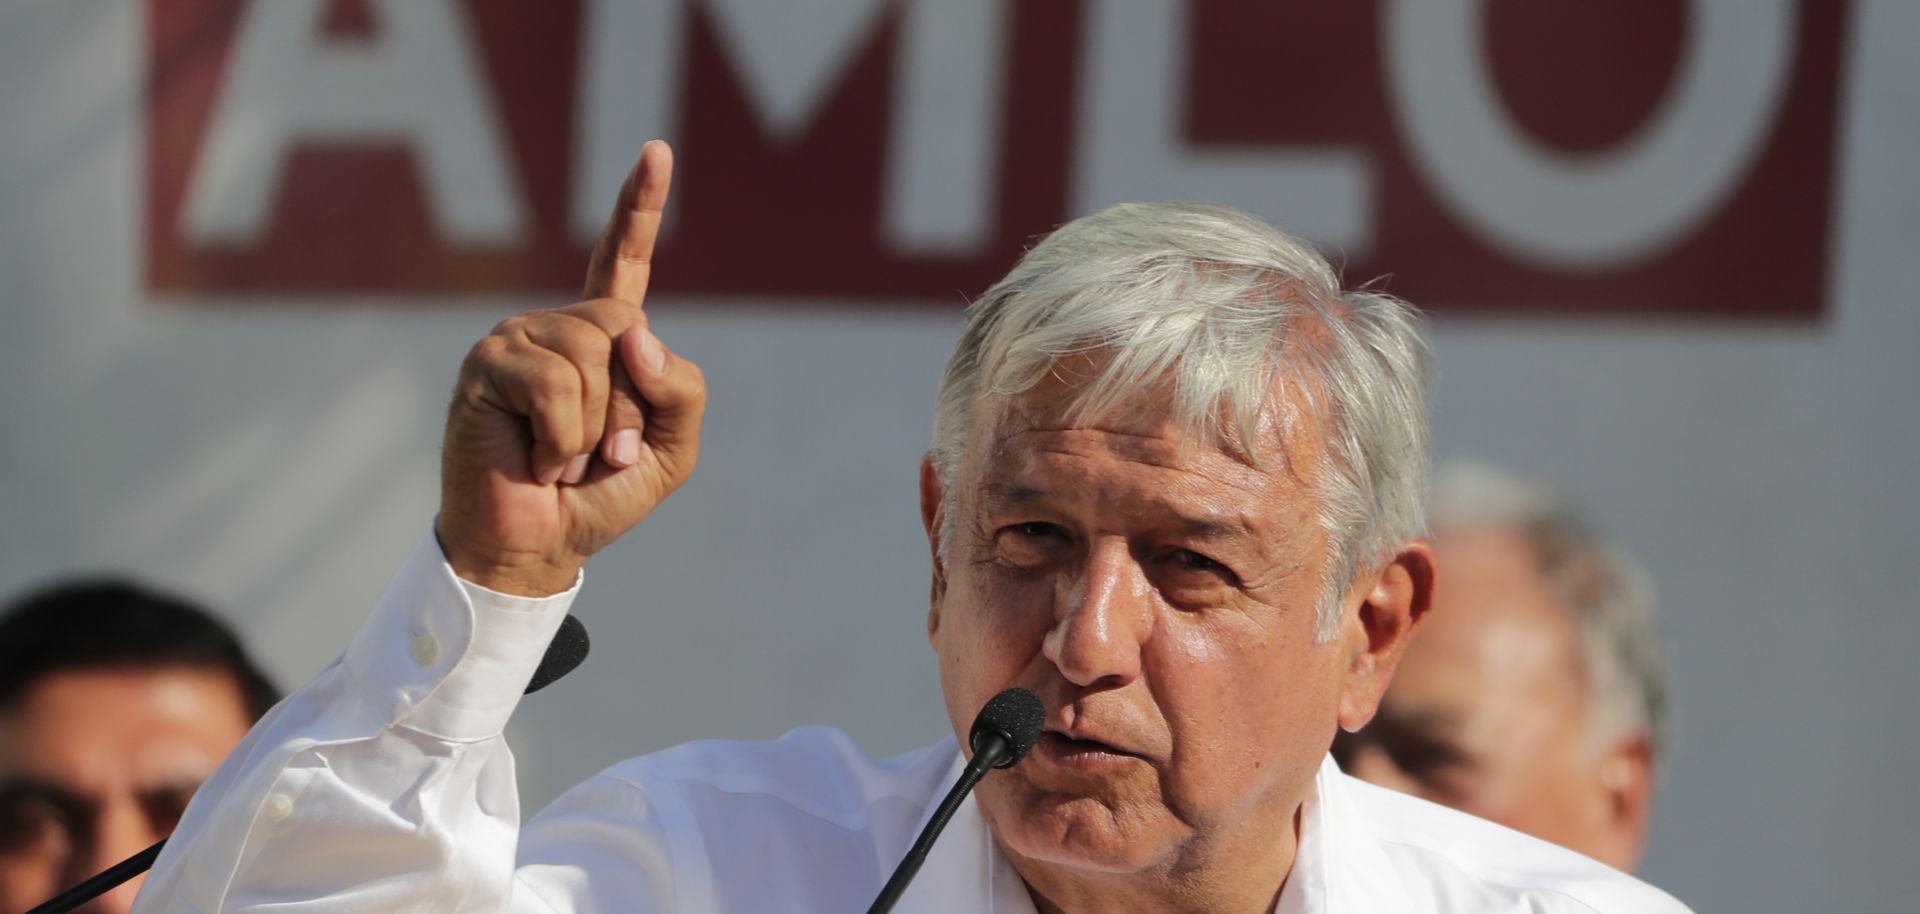 Andres Manuel Lopez Obrador, the National Regeneration Movement's candidate for Mexico's presidency, addresses the crowd at a campaign event on April 20, 2018.